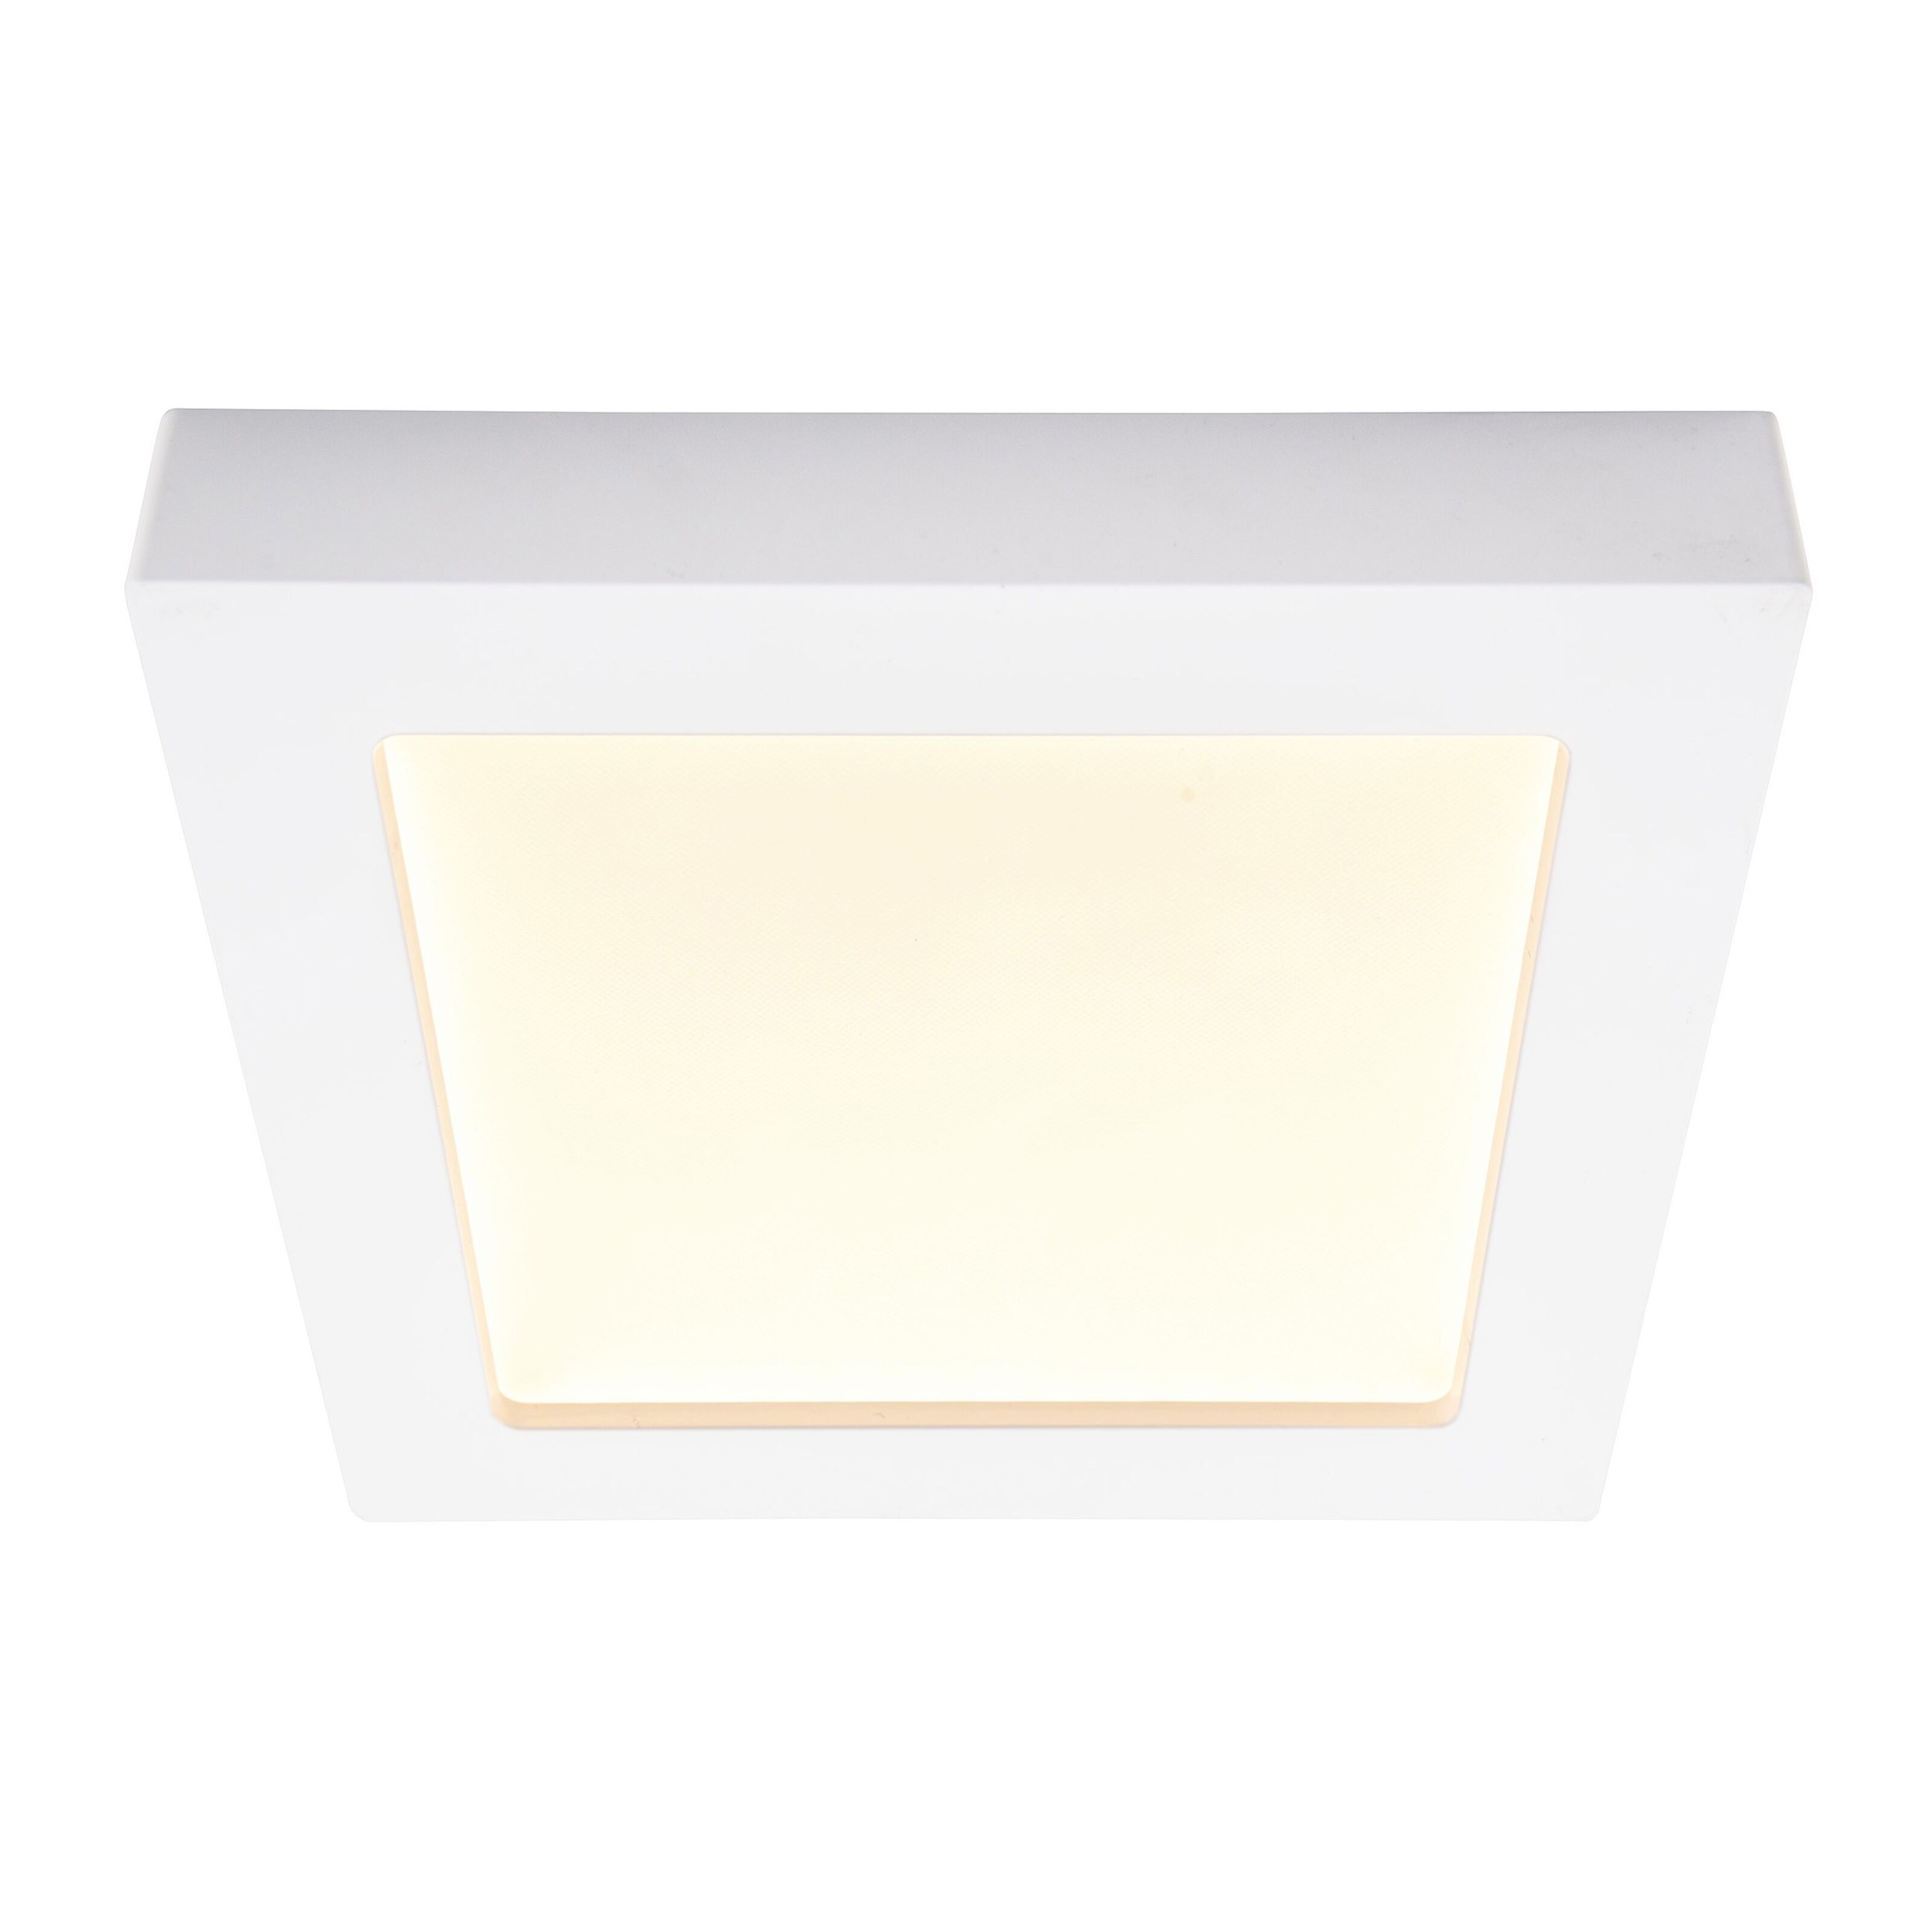 Sparfuchs Buy wholesale LED built-in/surface-mounted 22.7 cm s: light \